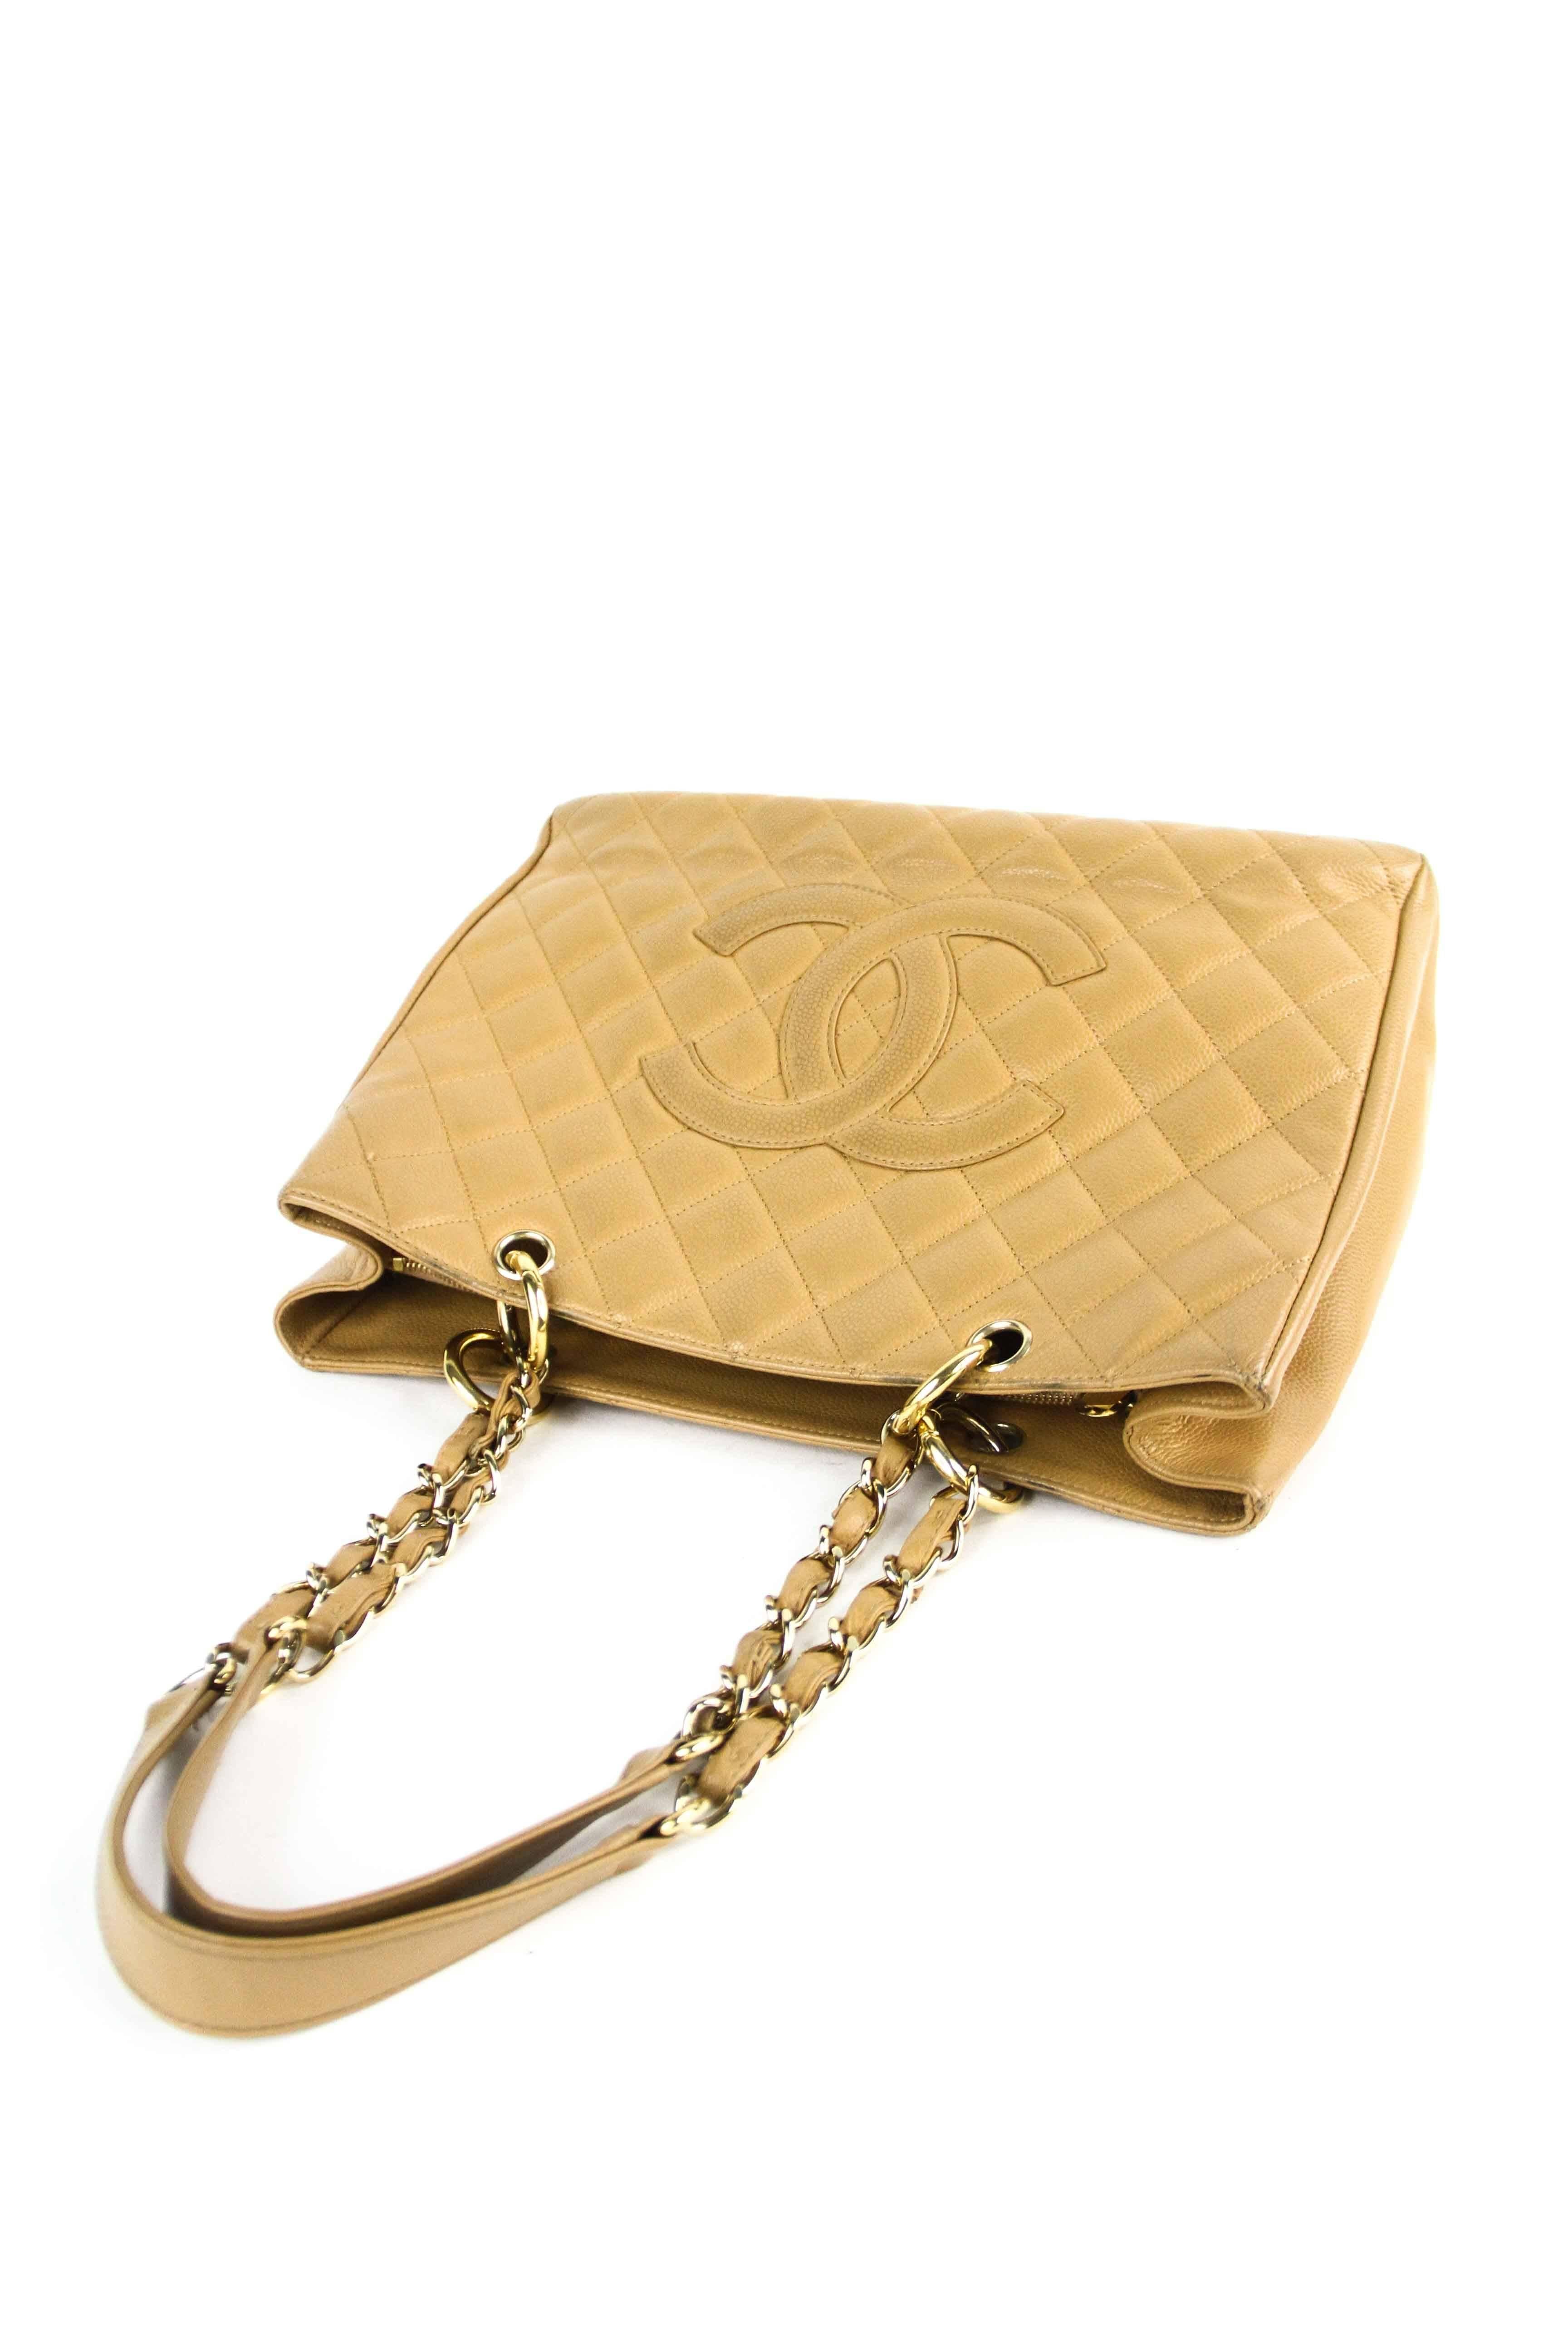 Chanel Beige Caviar Quilted Grand GST Shopping Tote  5